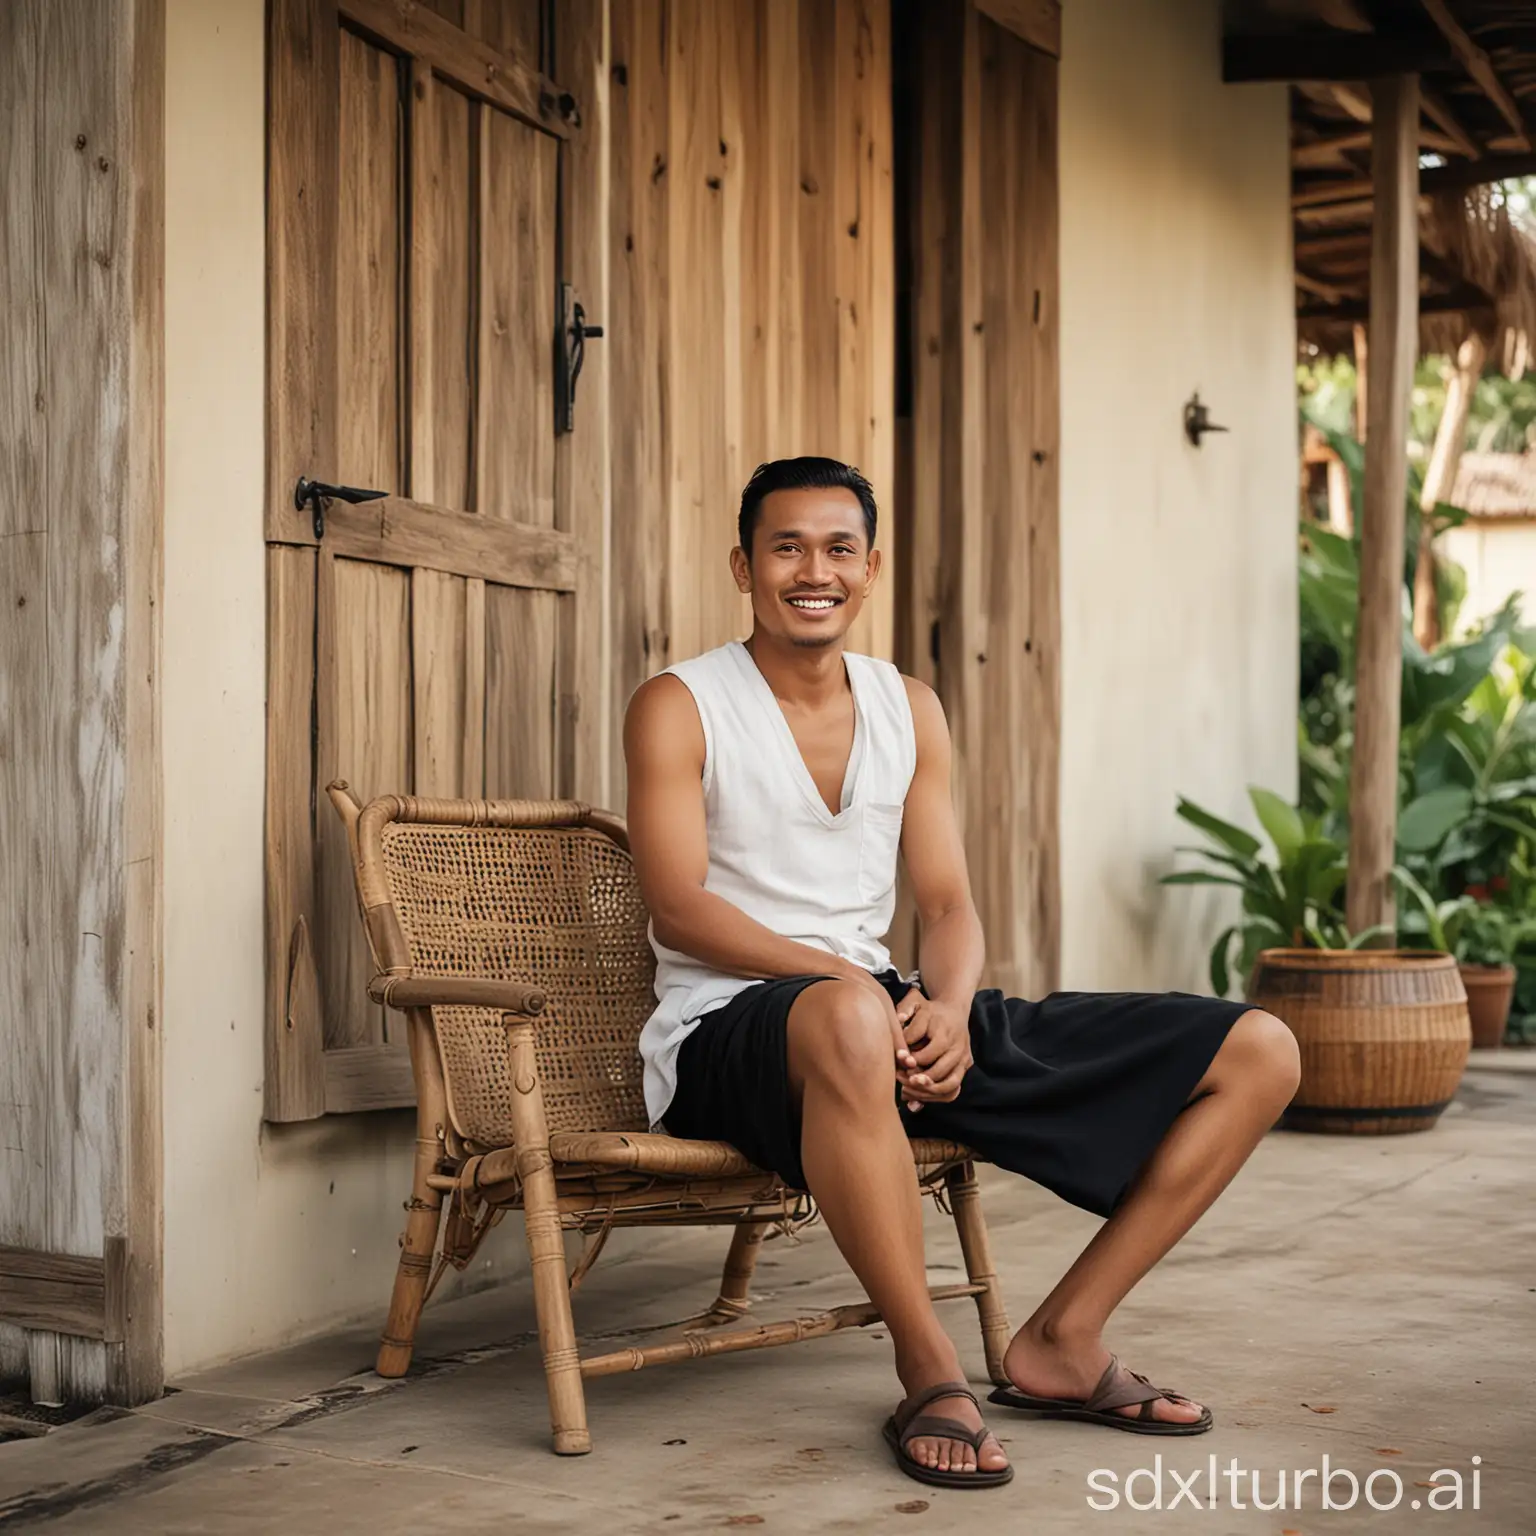 Smiling-Indonesian-Man-in-Traditional-Attire-with-Vintage-Camera-and-House-Background